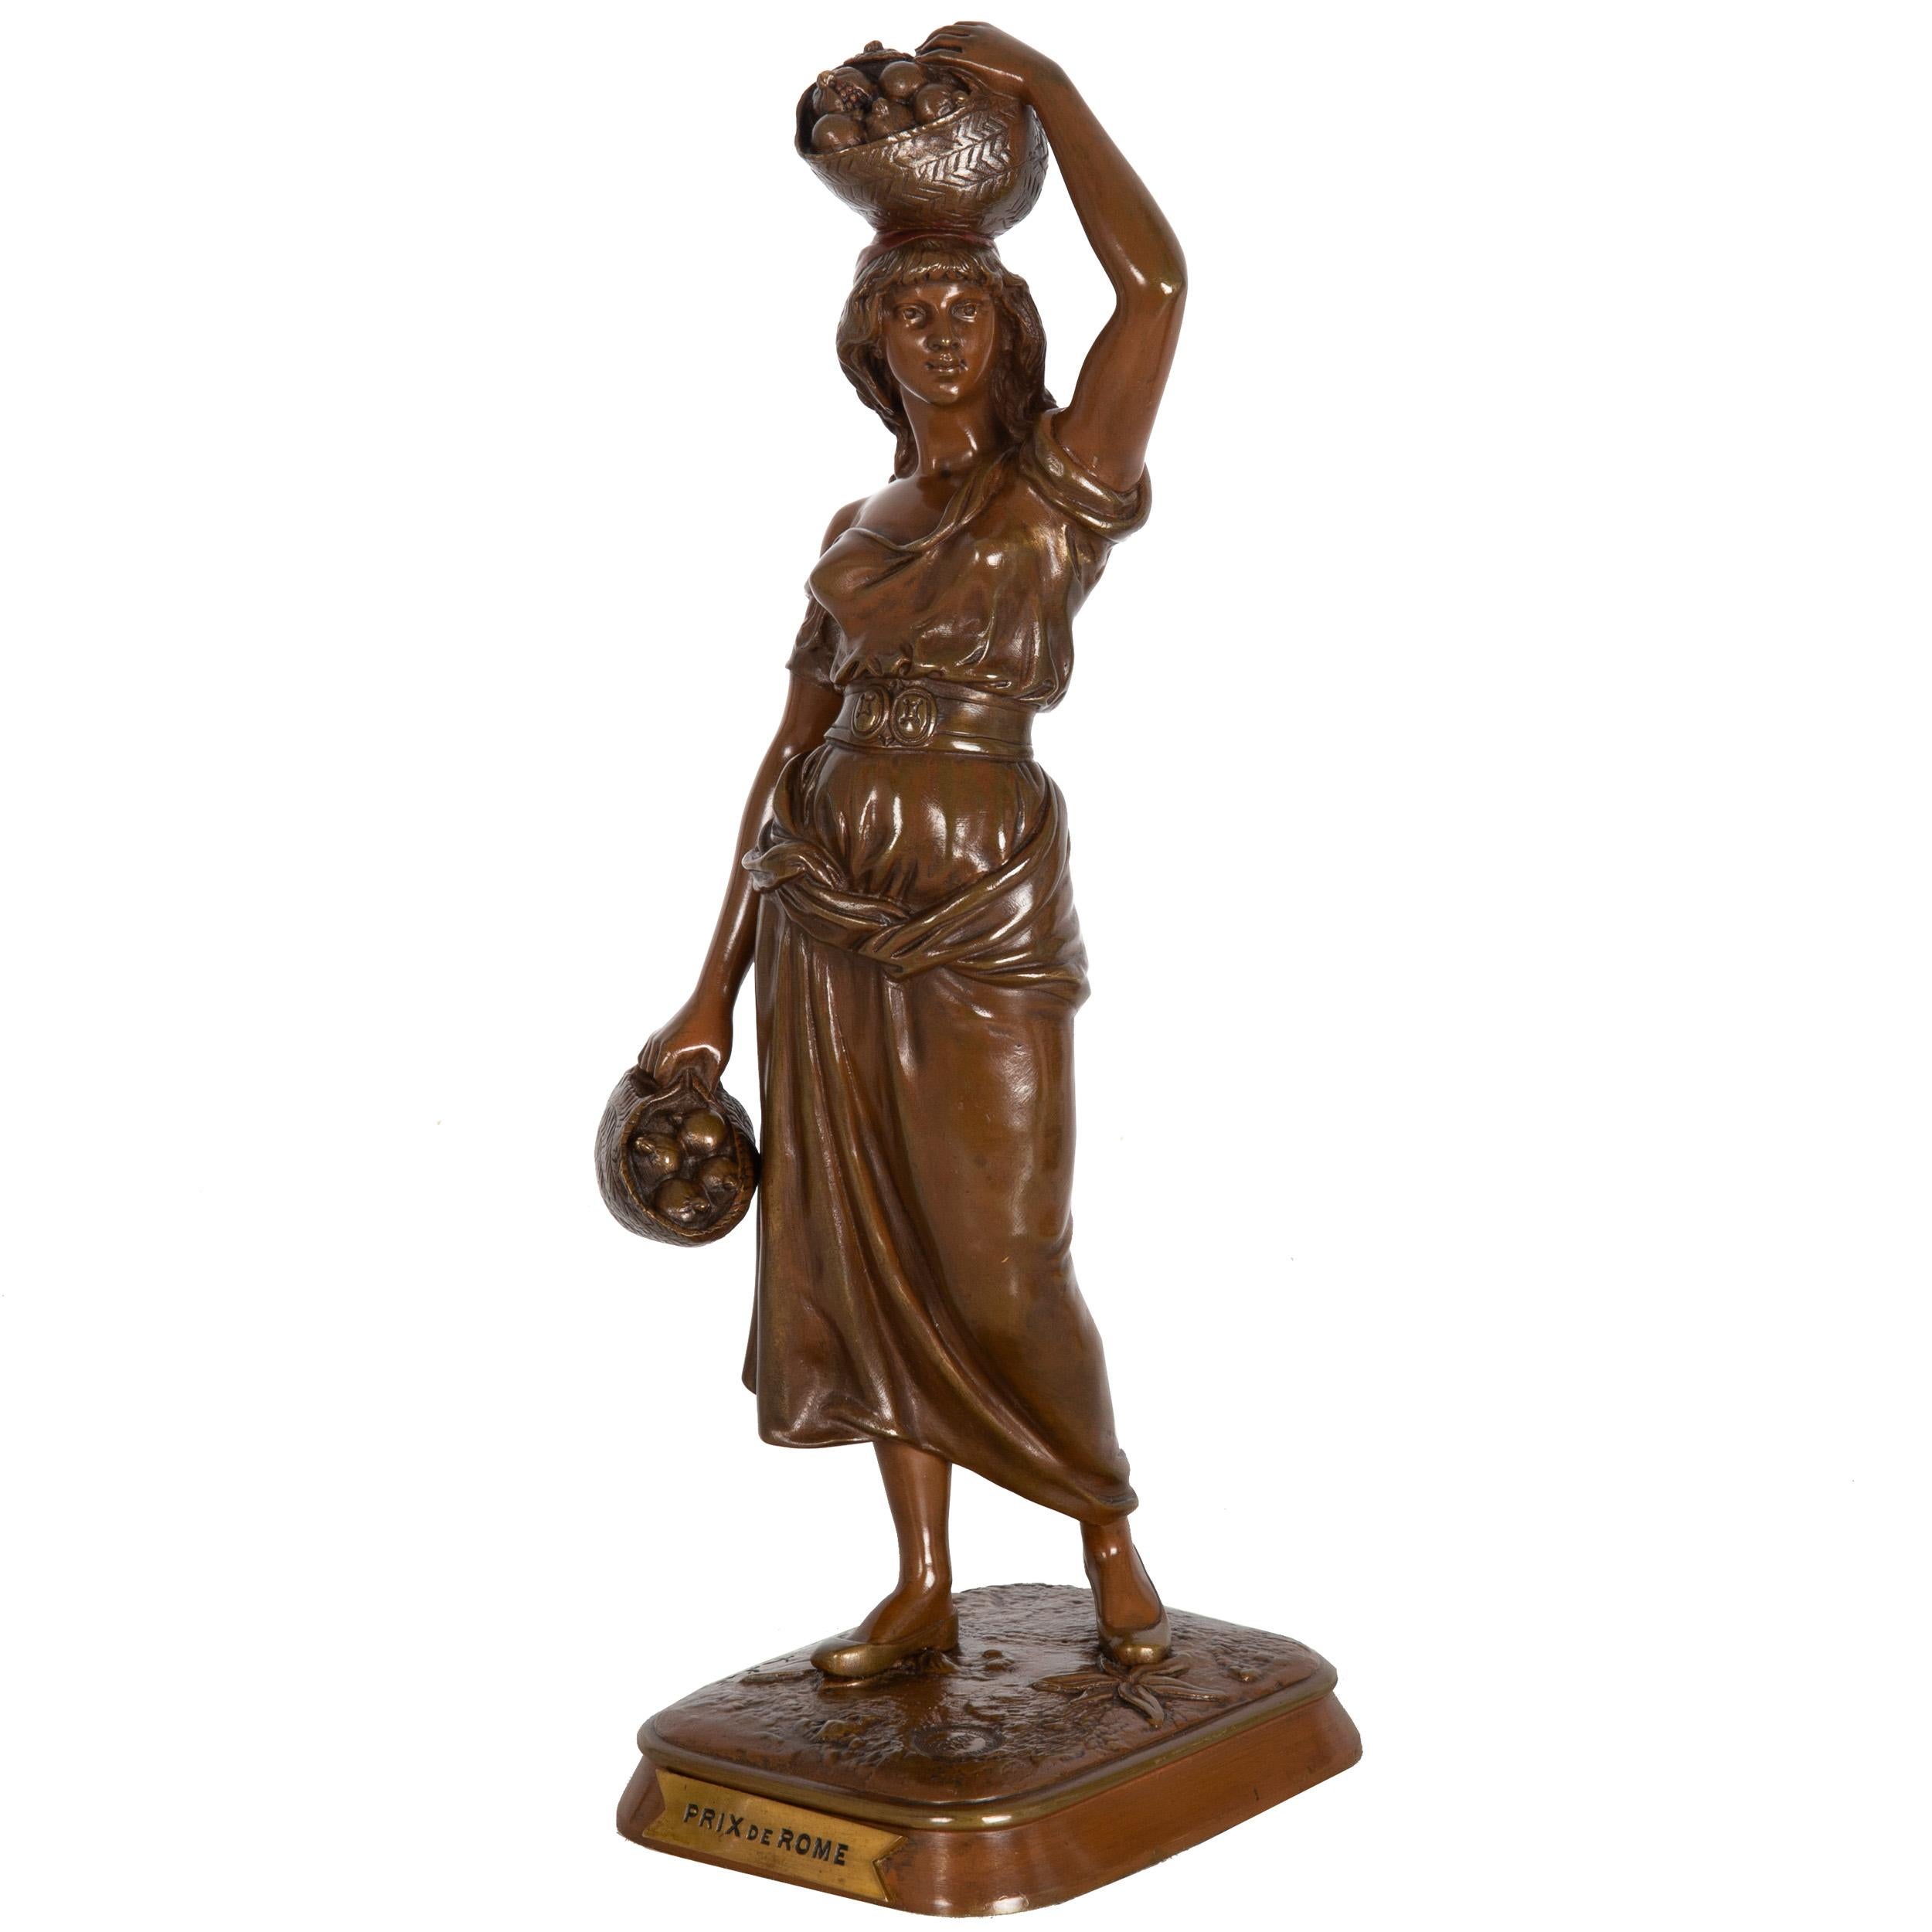 MARCEL DEBUT
French, 1865-1933
French Orientalist Model of a Girl Carrying Fruit Baskets

Polychromed and patinated bronze  signed 